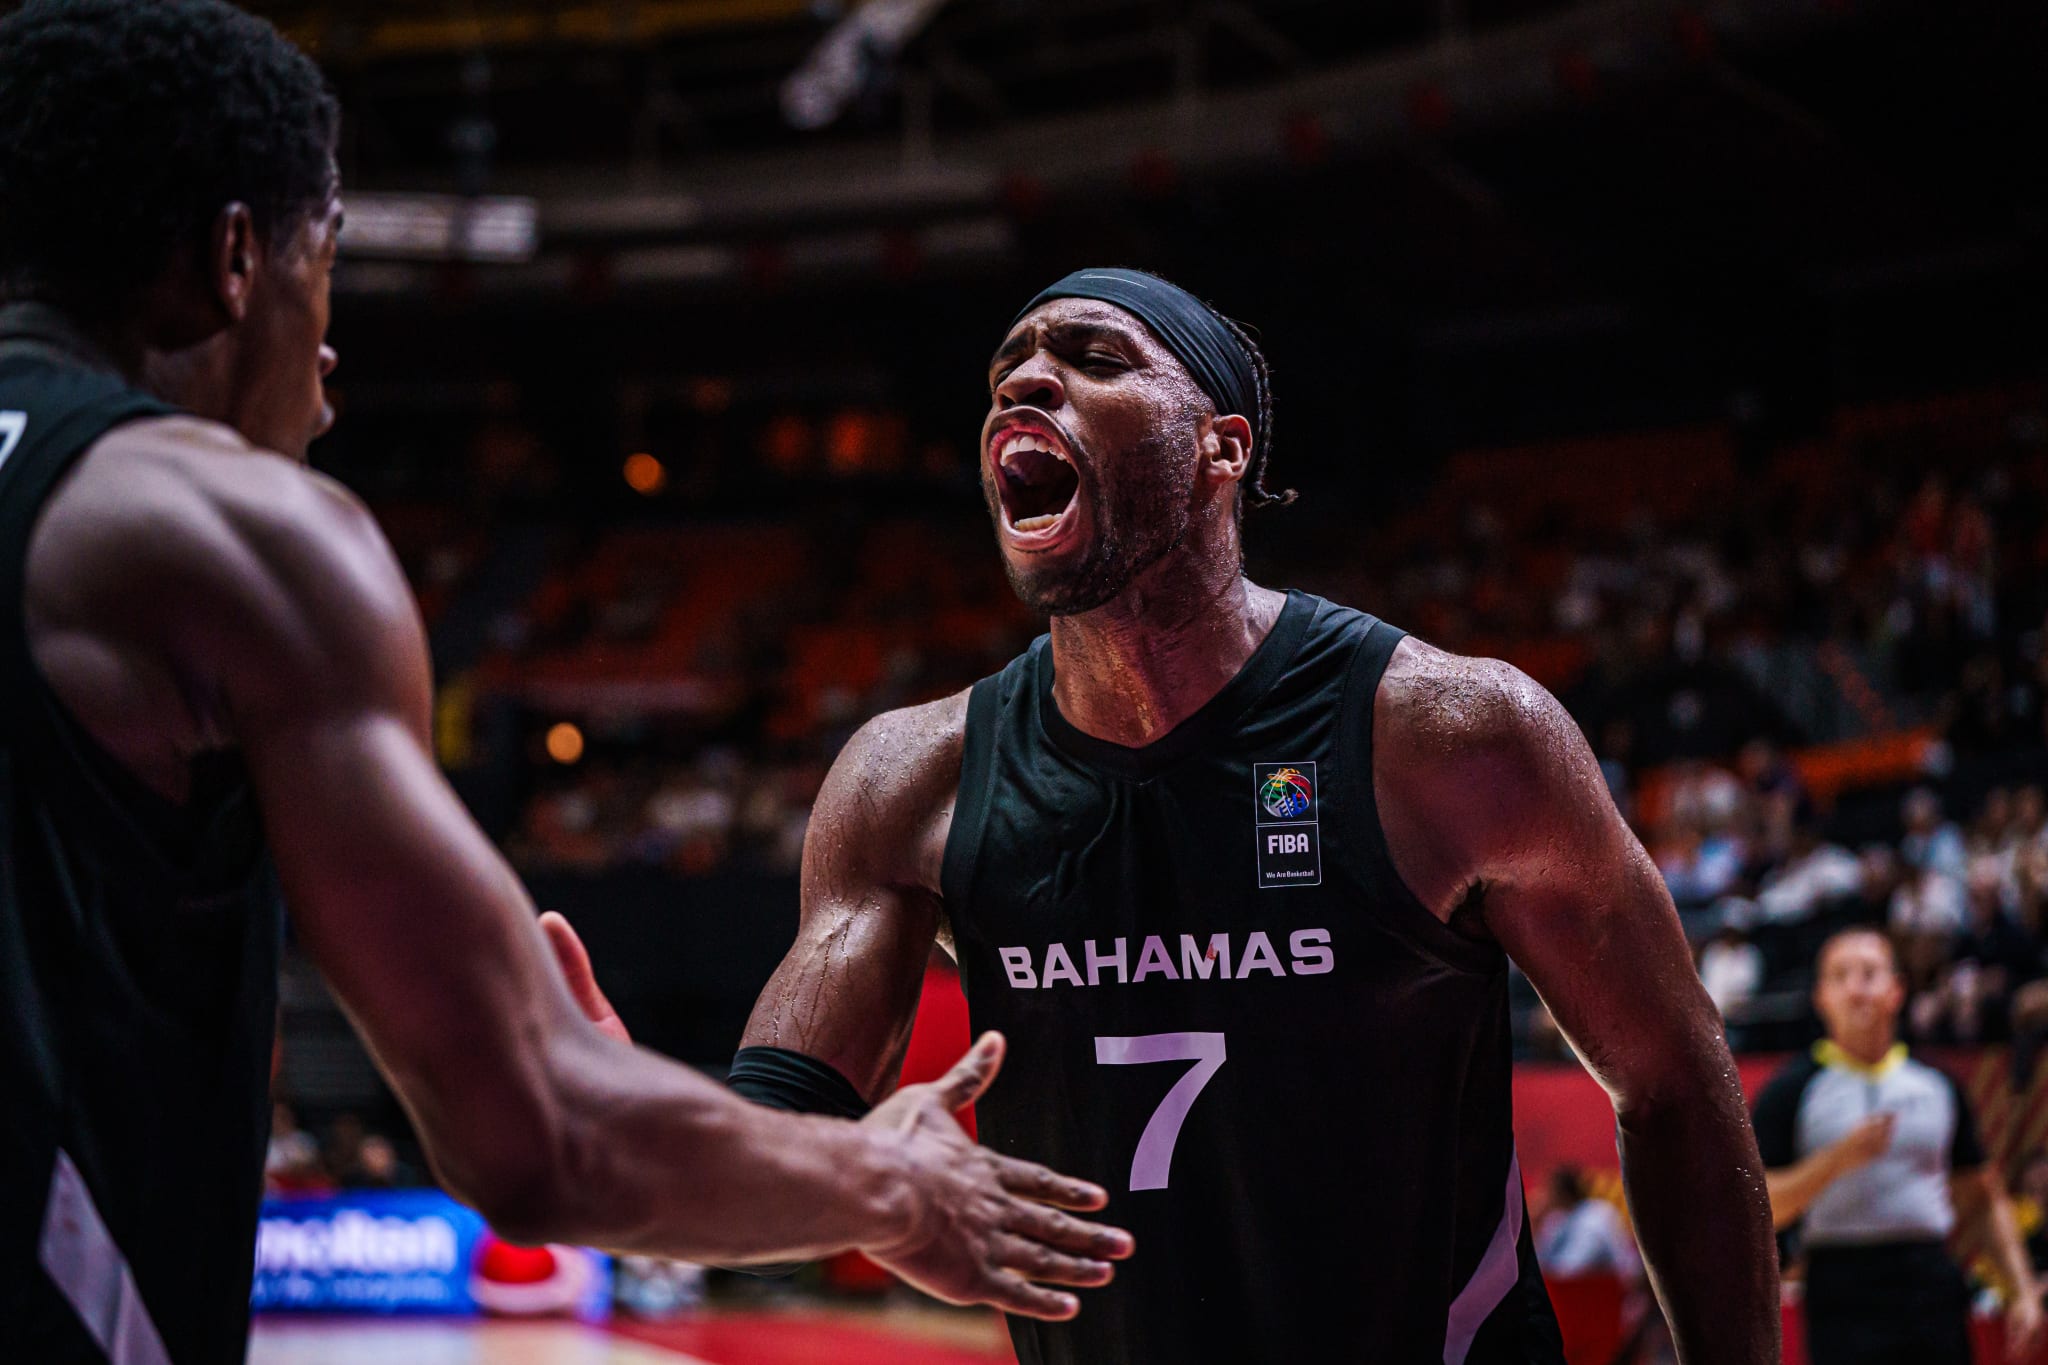 BAHAMAS AND DOMINICAN REPUBLIC WIN AT START OF PARIS 2024 OLYMPIC QUALIFYING TOURNAMENT